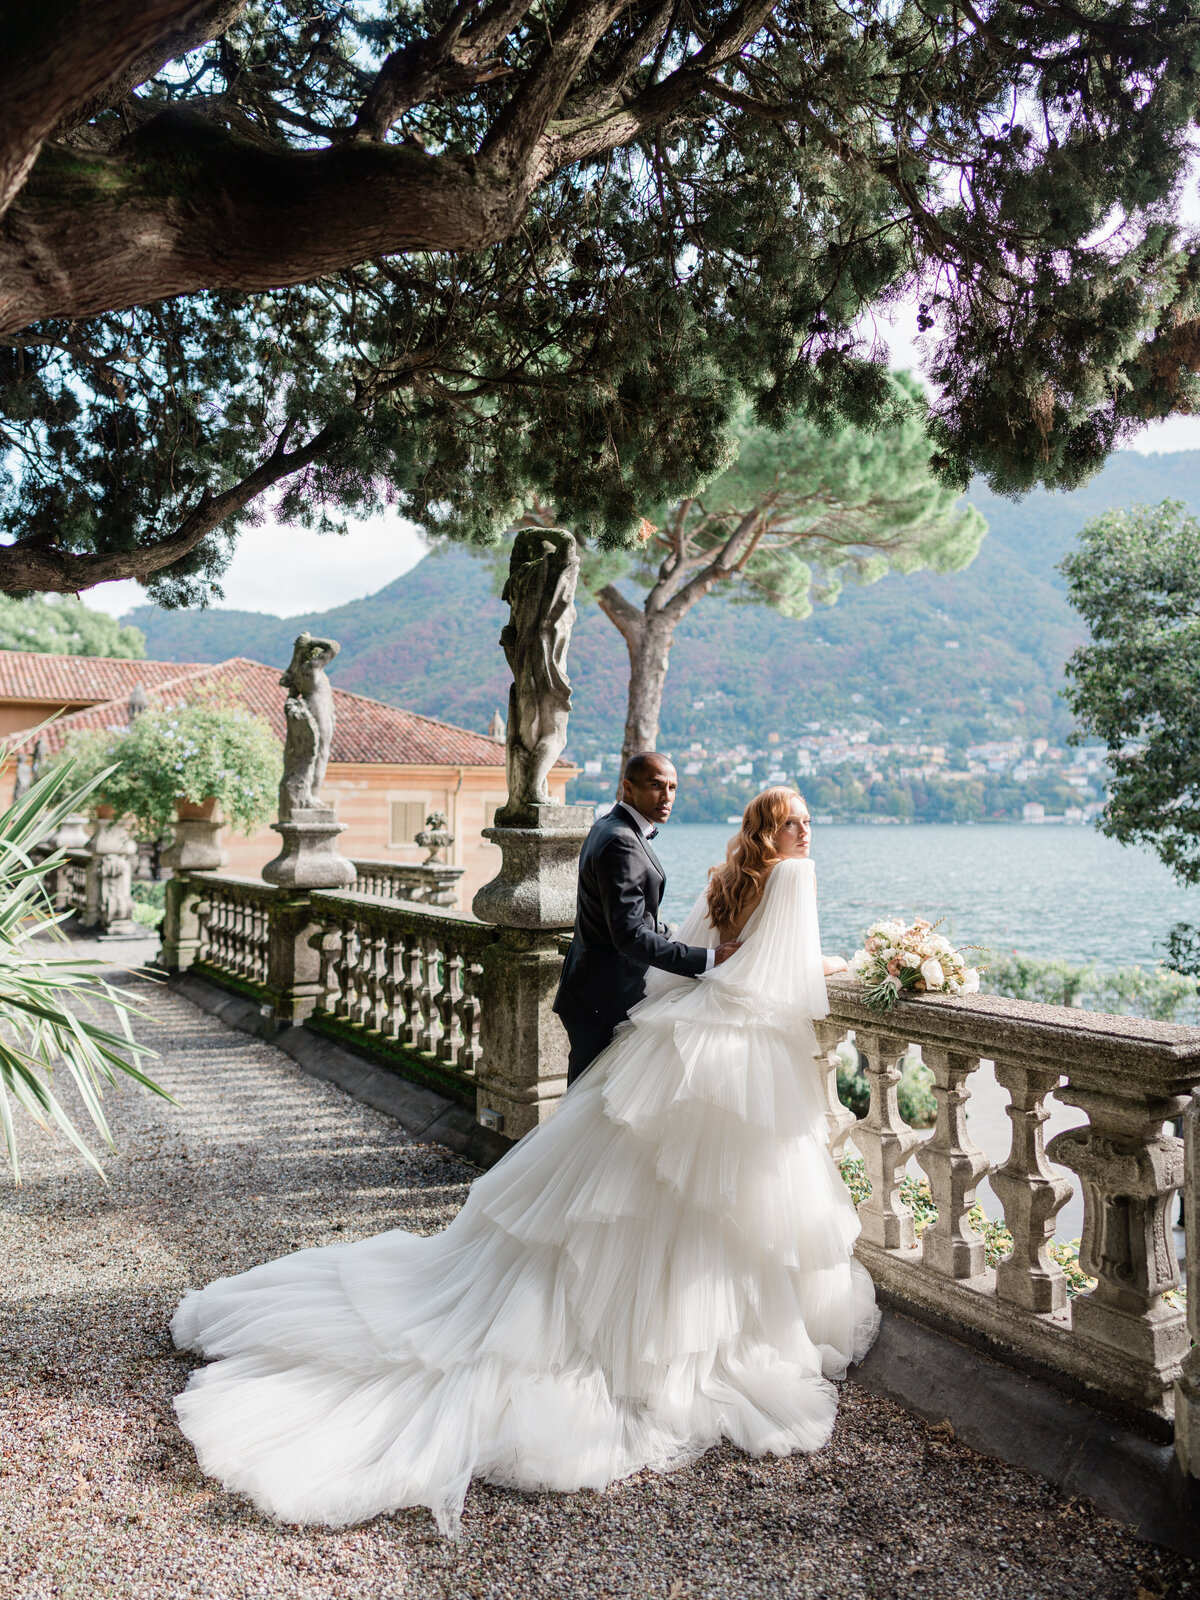 Liz Andolina Photography Destination Wedding Photographer in Italy, New York, Across the East Coast Editorial, heritage-quality images for stylish couples Villa Pizzo Editorial-Liz Andolina Photography-175